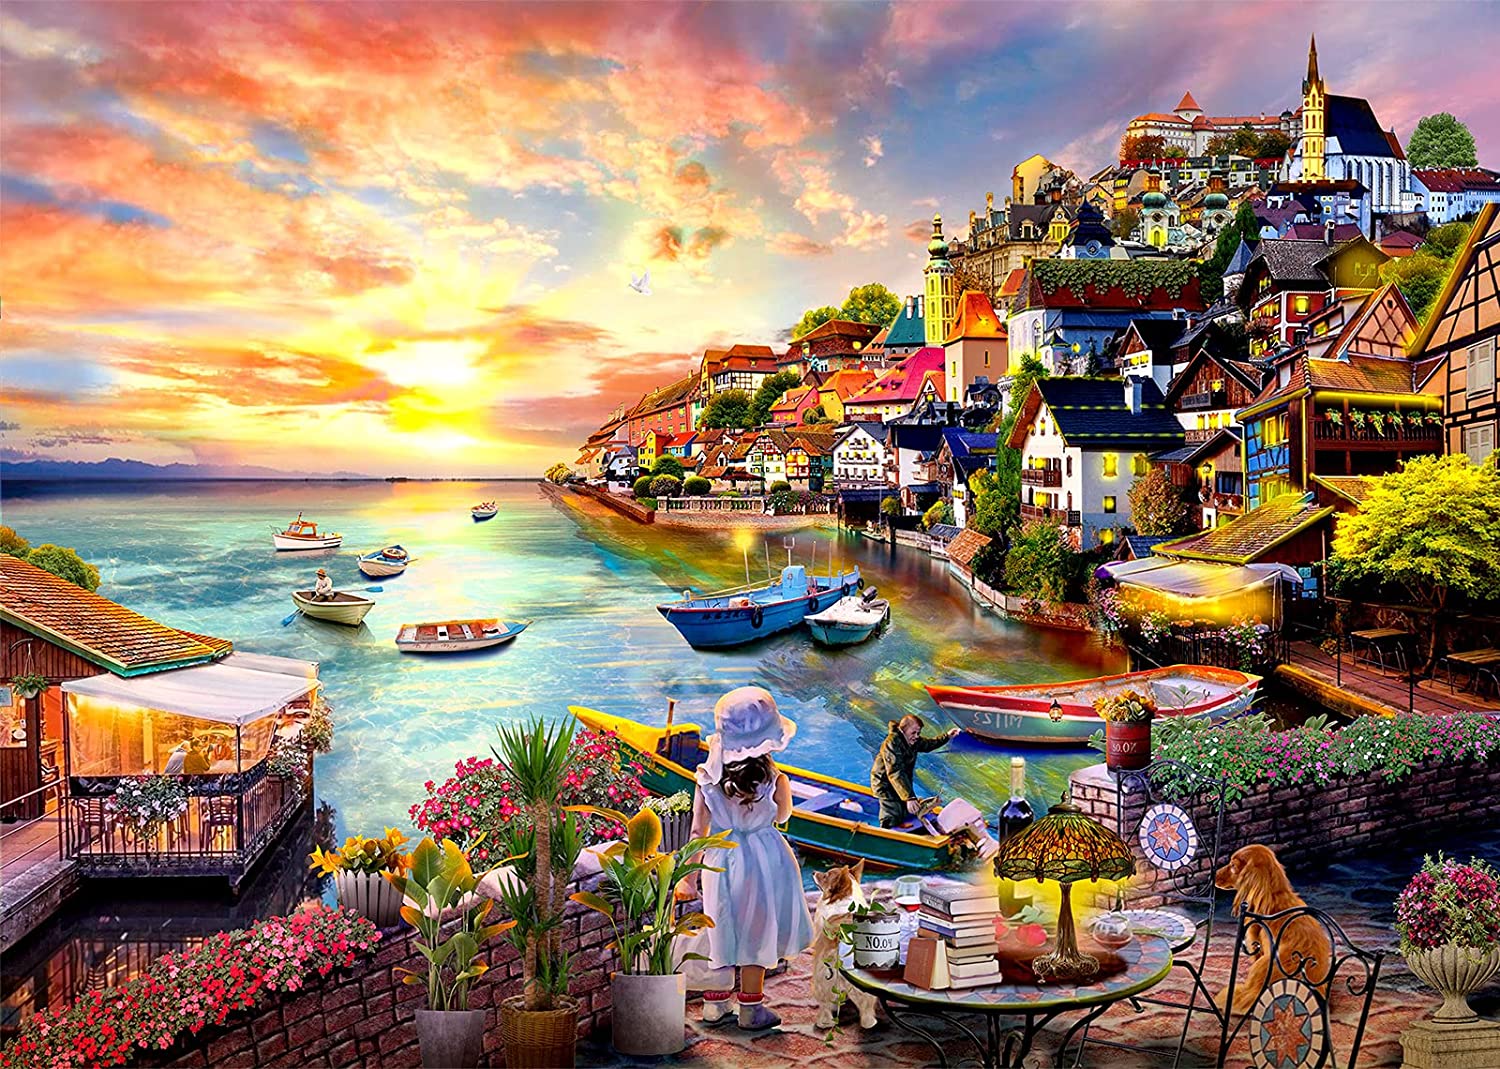 Little Girl Waiting at Seaside Village 1000 Pieces Jigsaw Puzzle